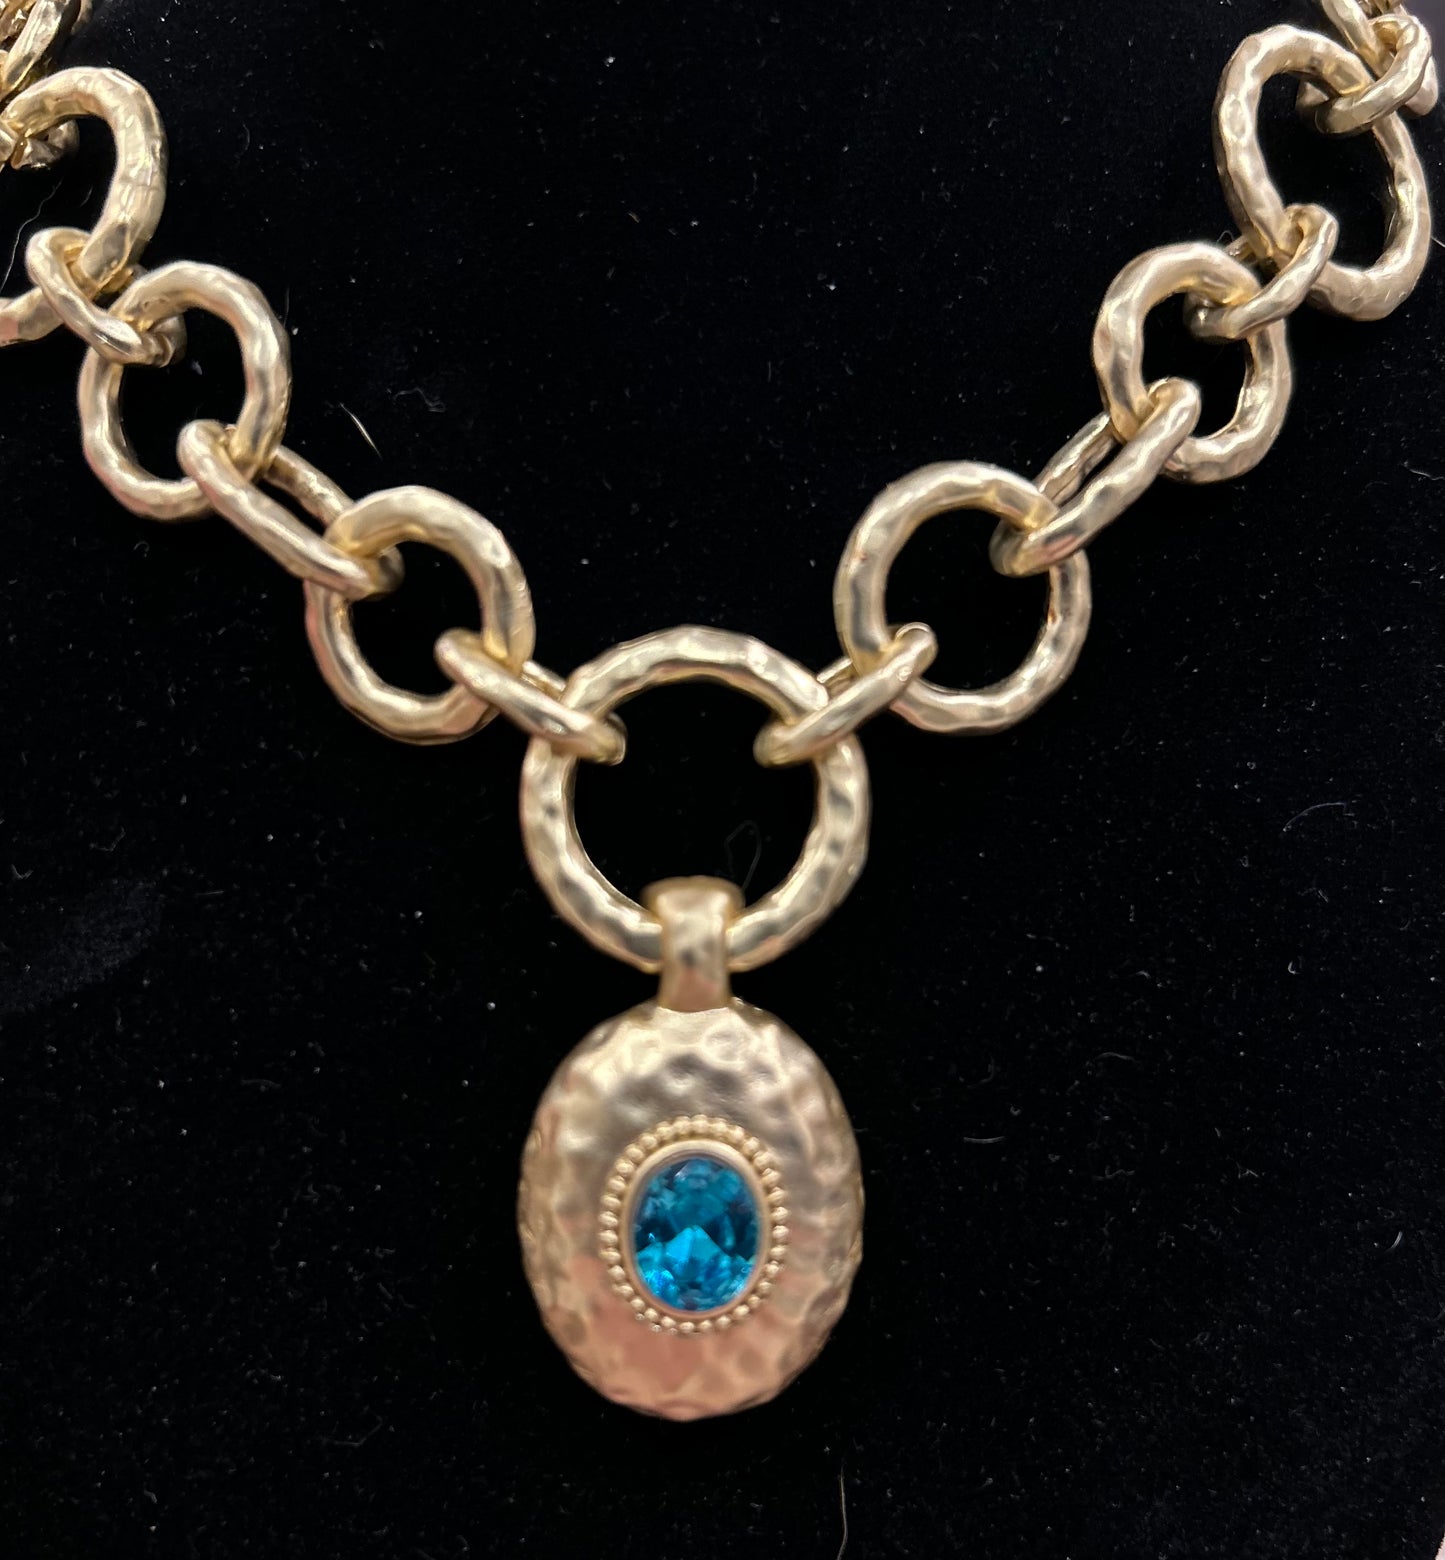 Gorgeous Vermeil Link Necklace with Stunning Blue Crystal Stone